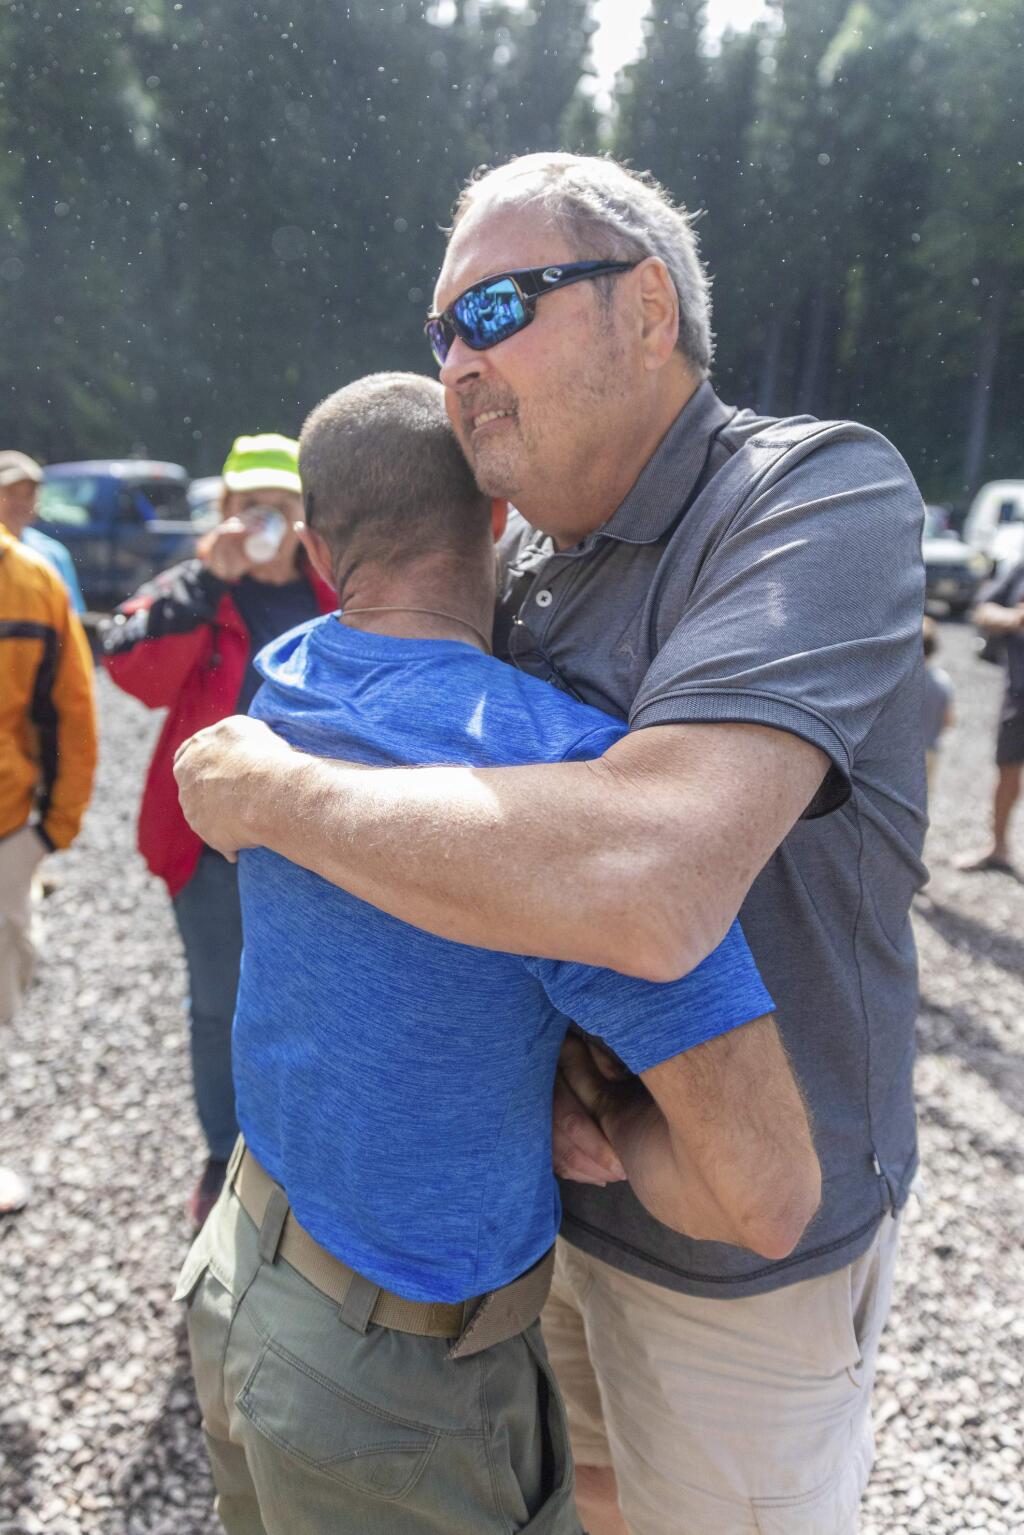 John Eller, right, hugs rescue lead Javier Cantellops at the Makawao Forest Reserve base camp on Saturday, May 25, 2019 in Wailuku, Maui. The Maui News reported Friday Amanda Eller was found injured in the Makawao Forest Reserve. Family spokeswoman Sarah Haynes confirmed she spoke with Eller's father John. Eller was airlifted to safety. (Bryan Berkowitz/Honolulu Star-Advertiser via AP)